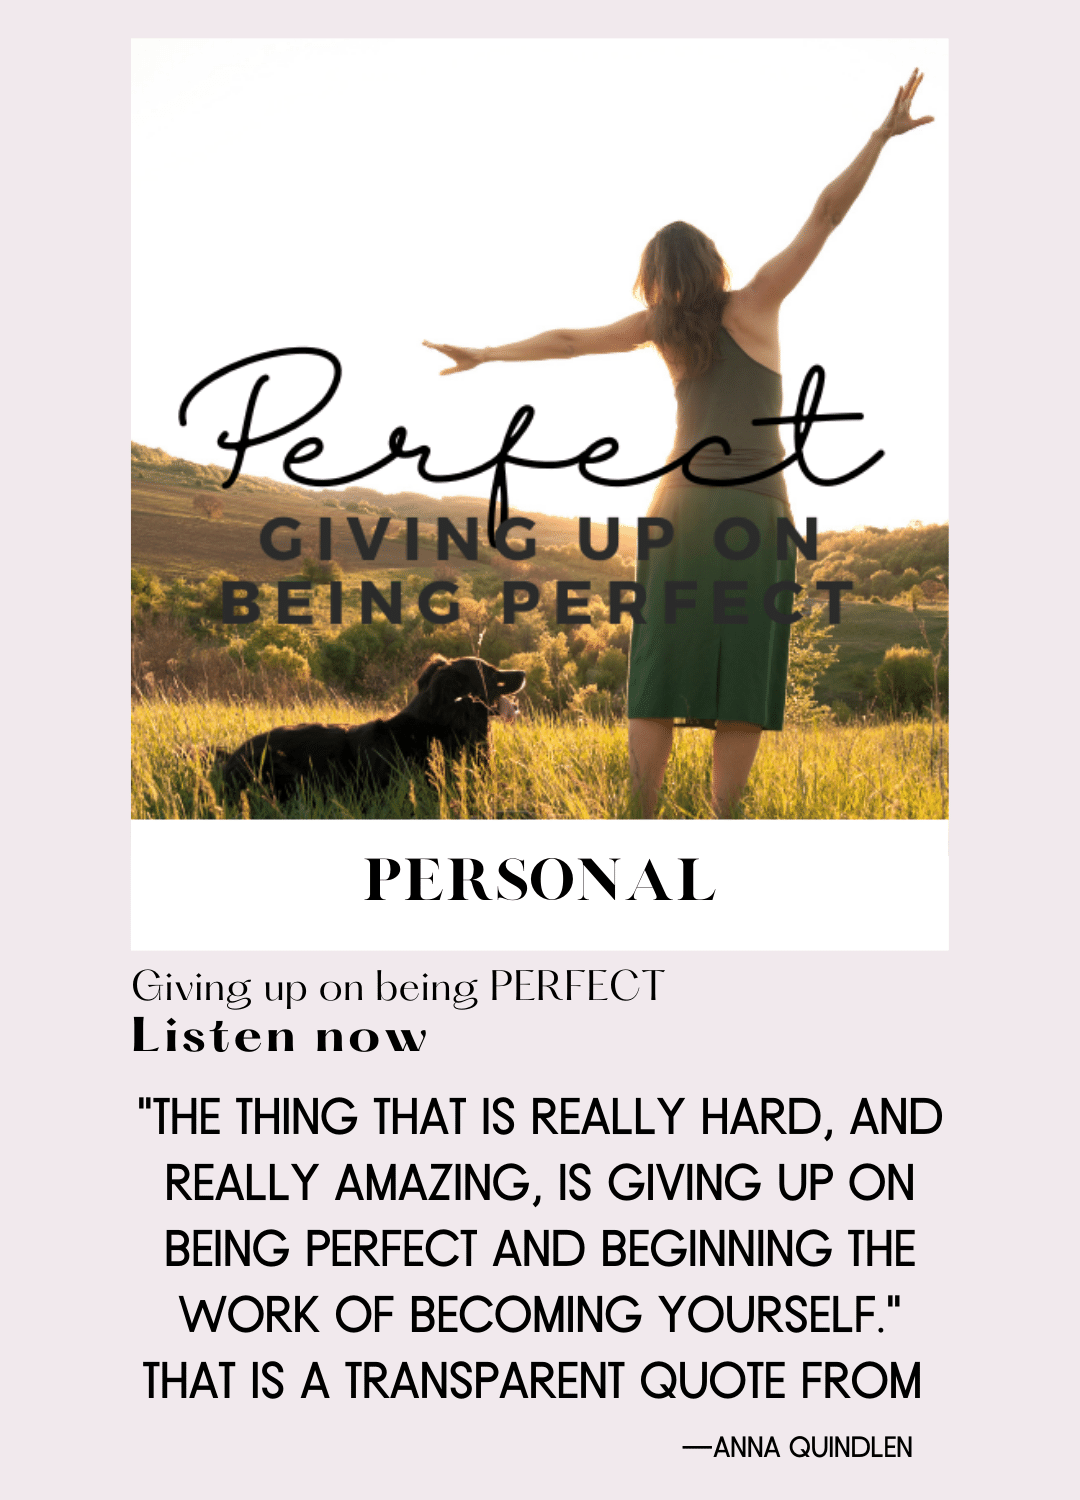 Giving up on being Perfect Podcast Episode 